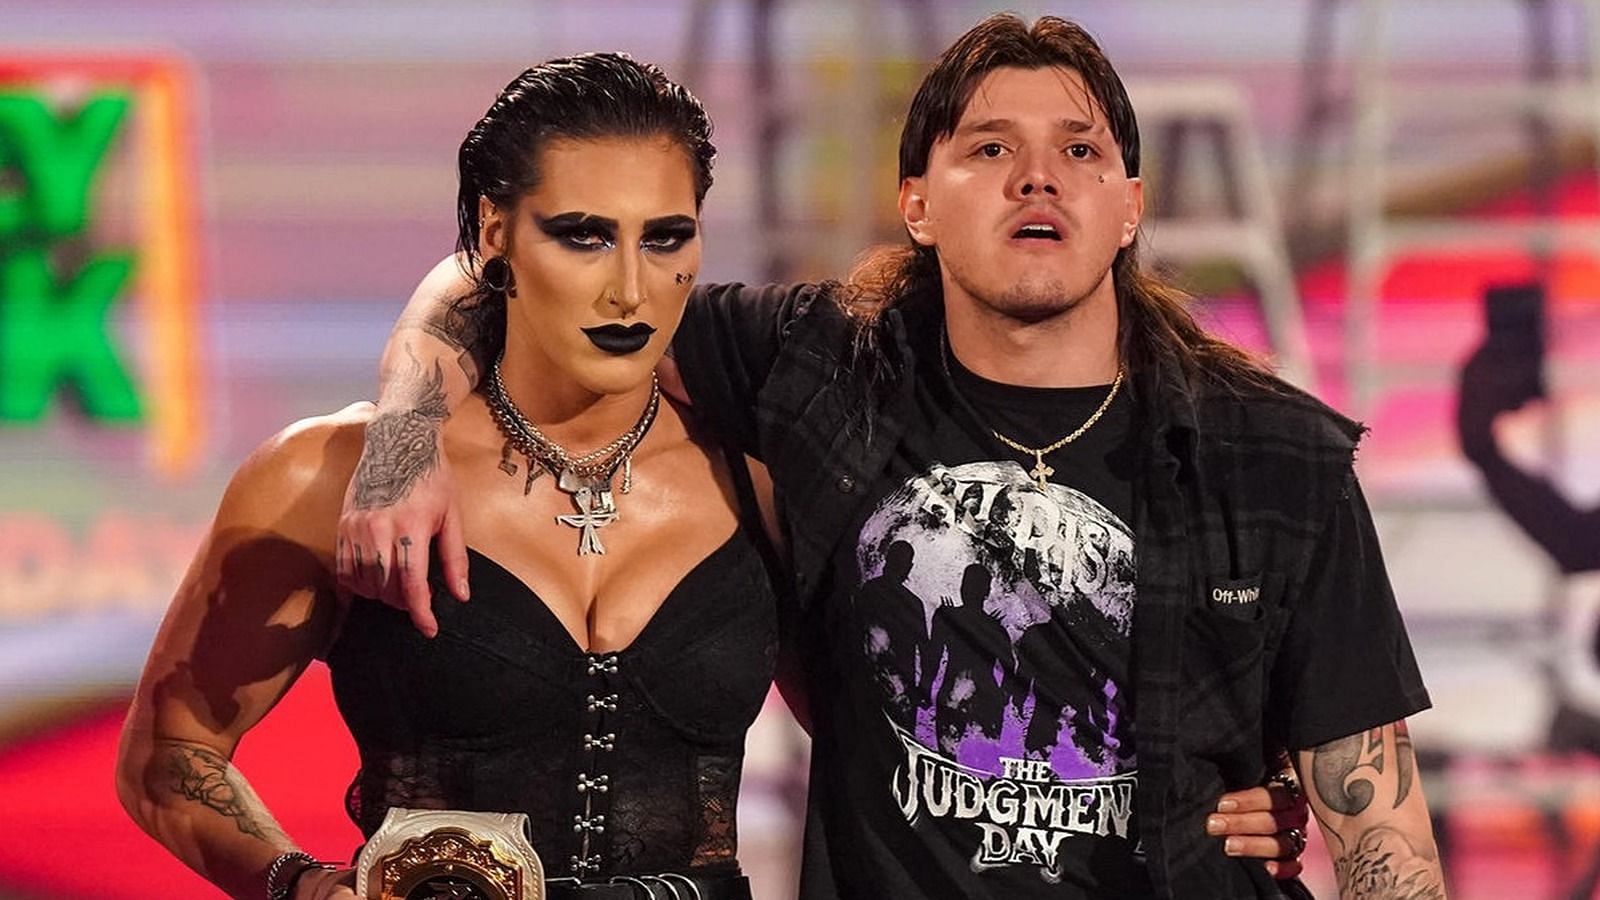 Will WWE RAW be the start of an interesting storyline for Rhea and Dominik?